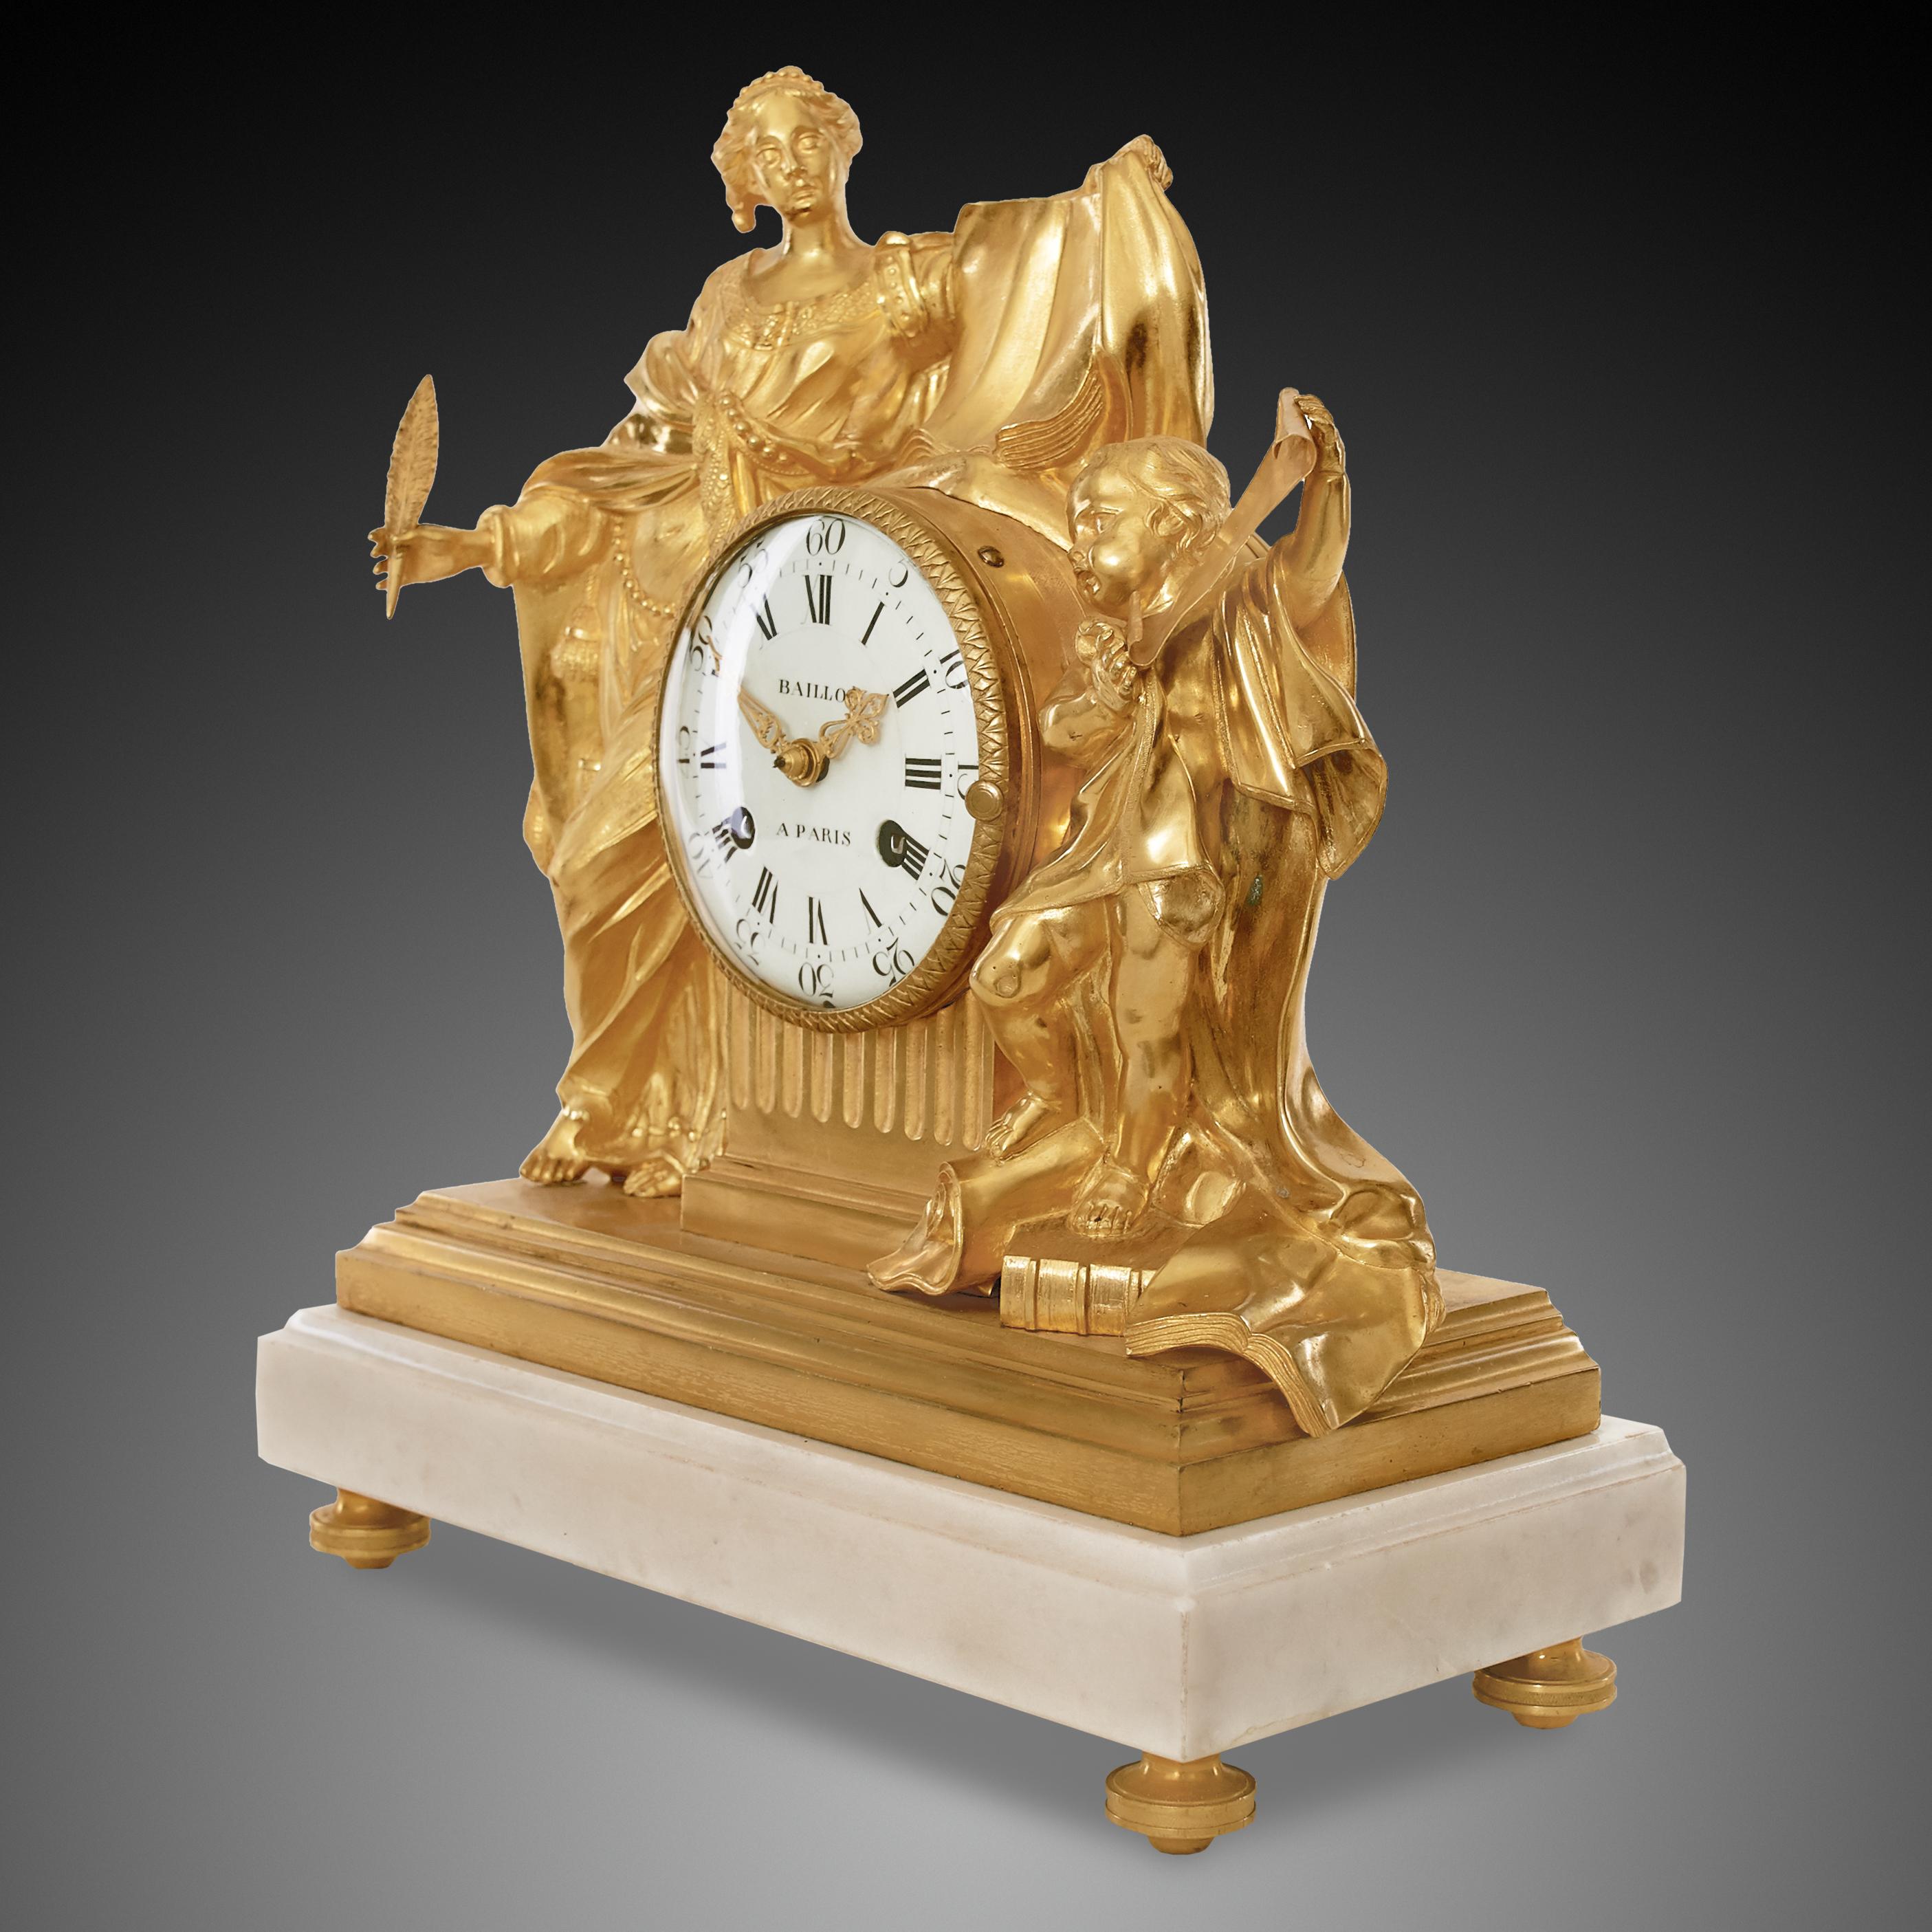 This clock was made by Jean-Baptiste Baillon III, one of the most skilled and innovative makers of his day. He supplied the most illustrious clientele, not least the French and Spanish royal family as well as distinguished members of Court and the